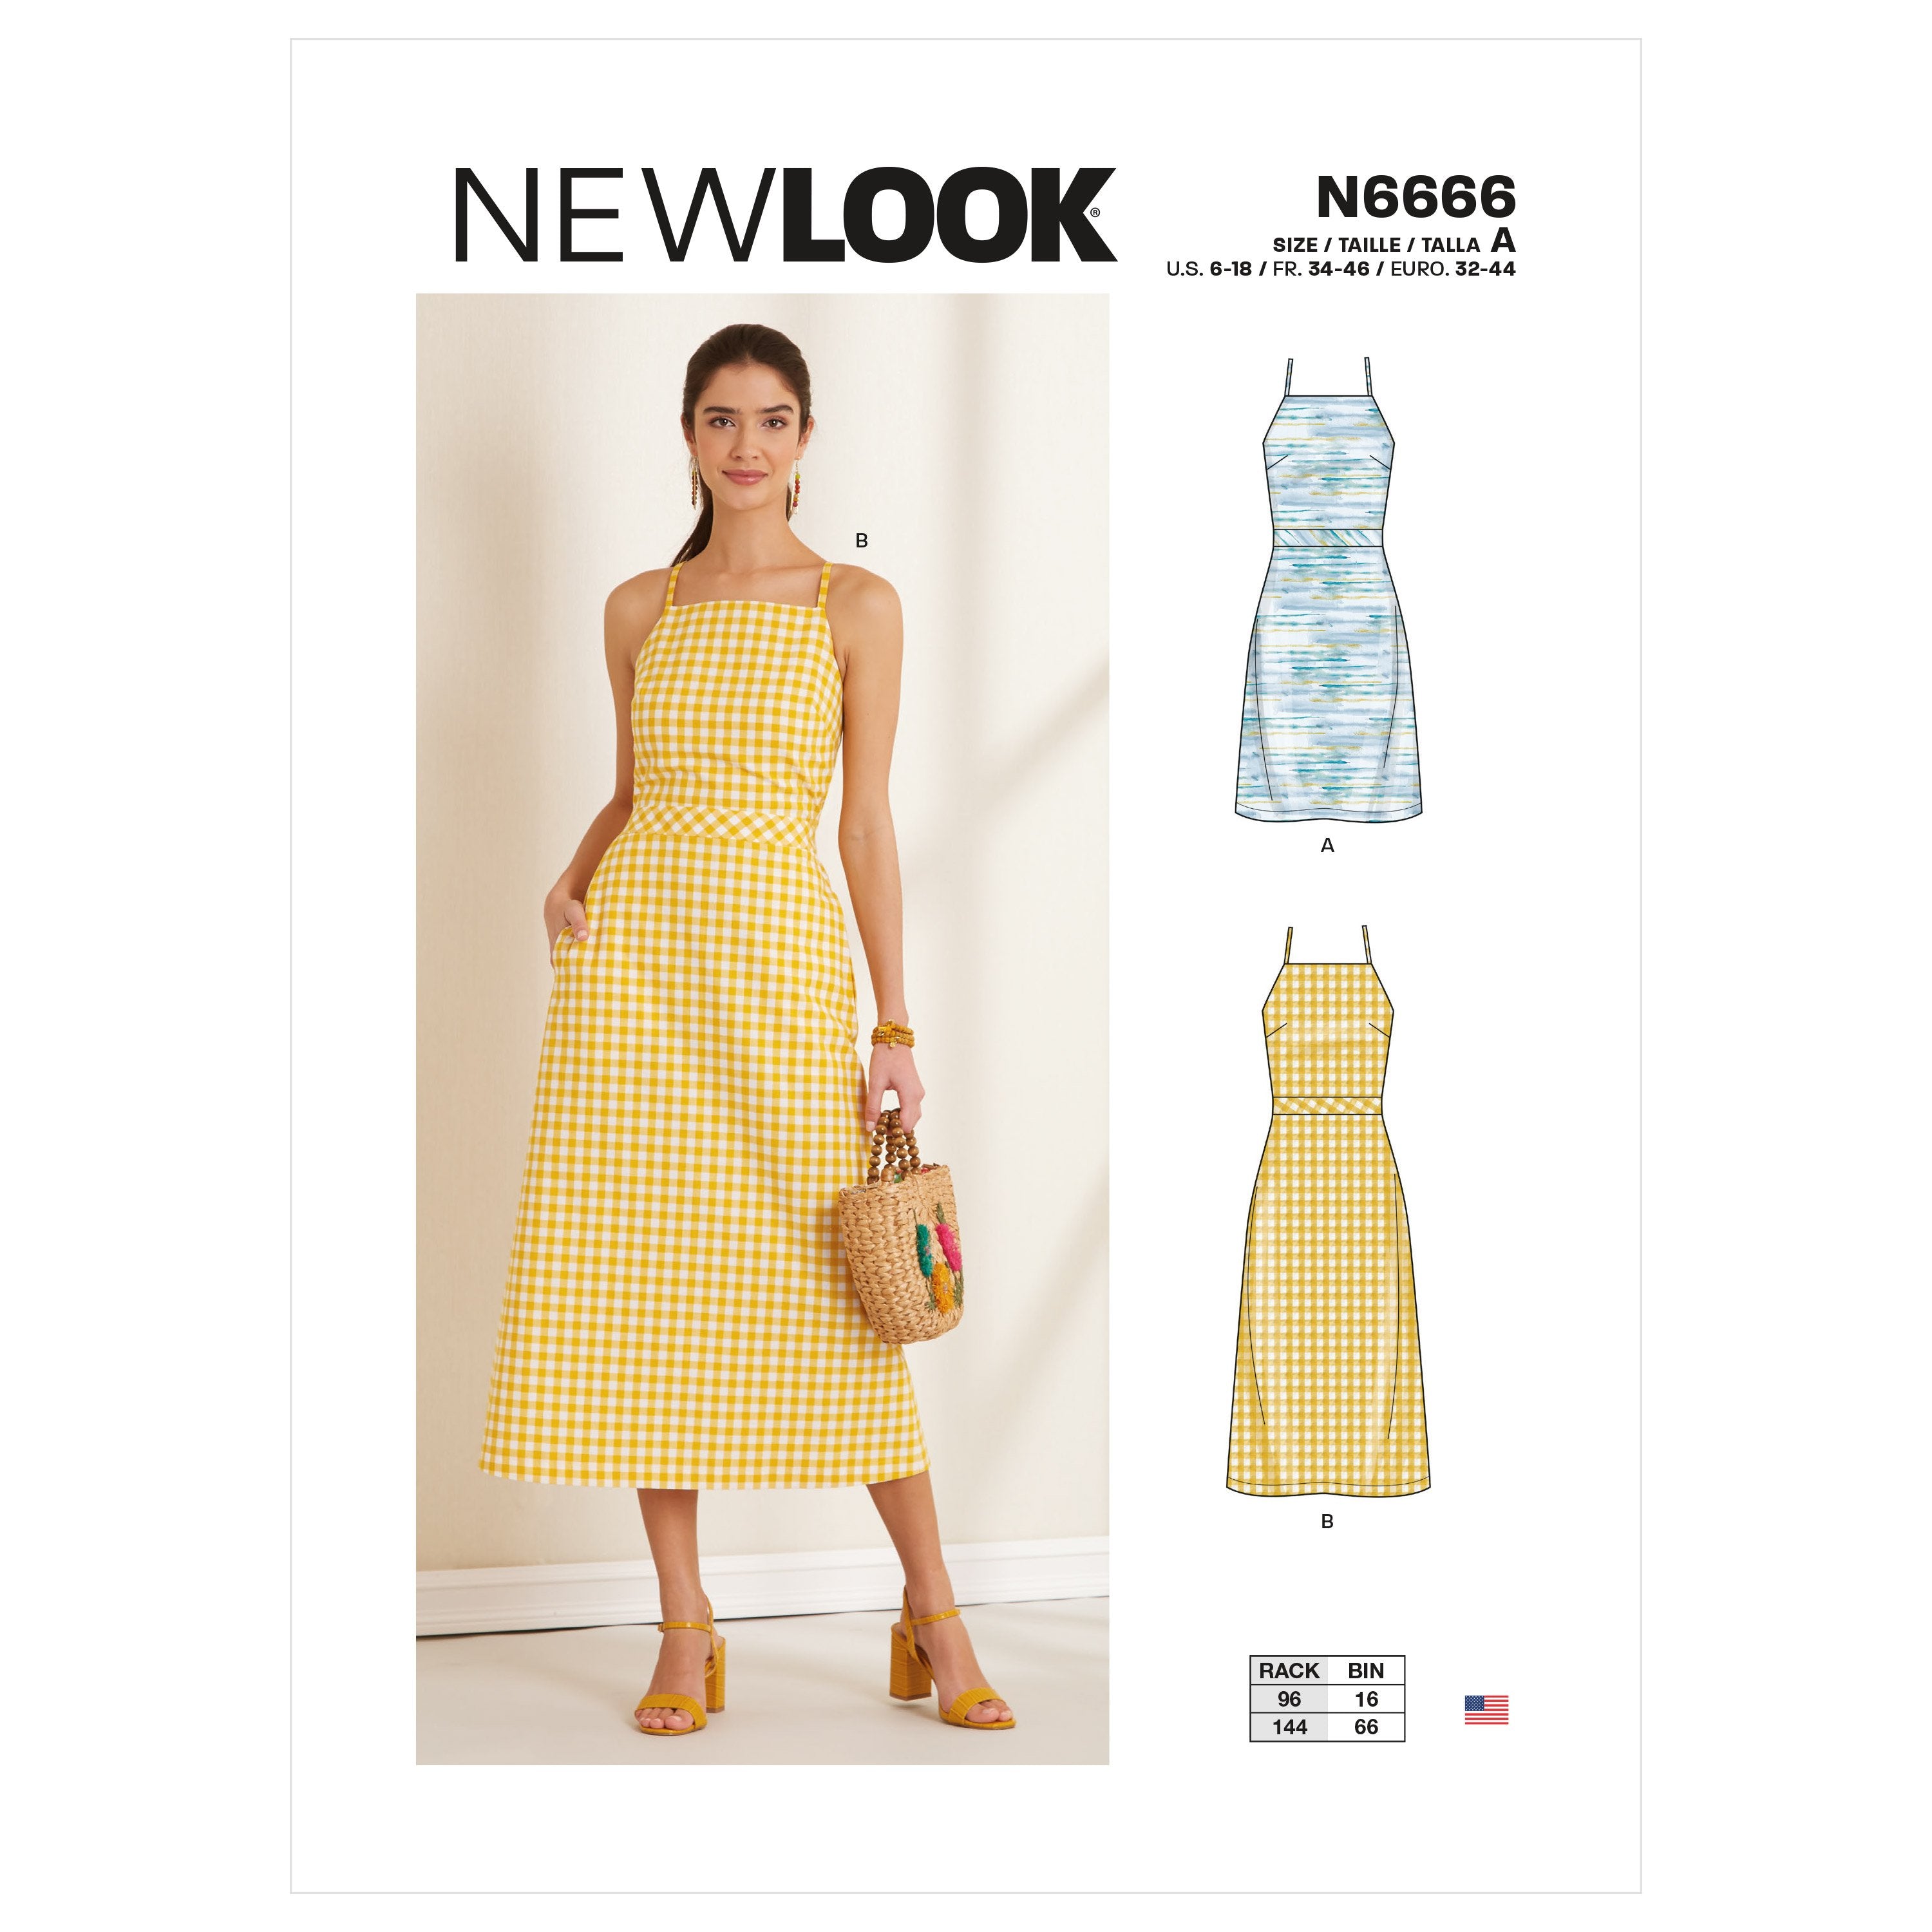 New Look Sewing Pattern 6666 Misses' Dress from Jaycotts Sewing Supplies